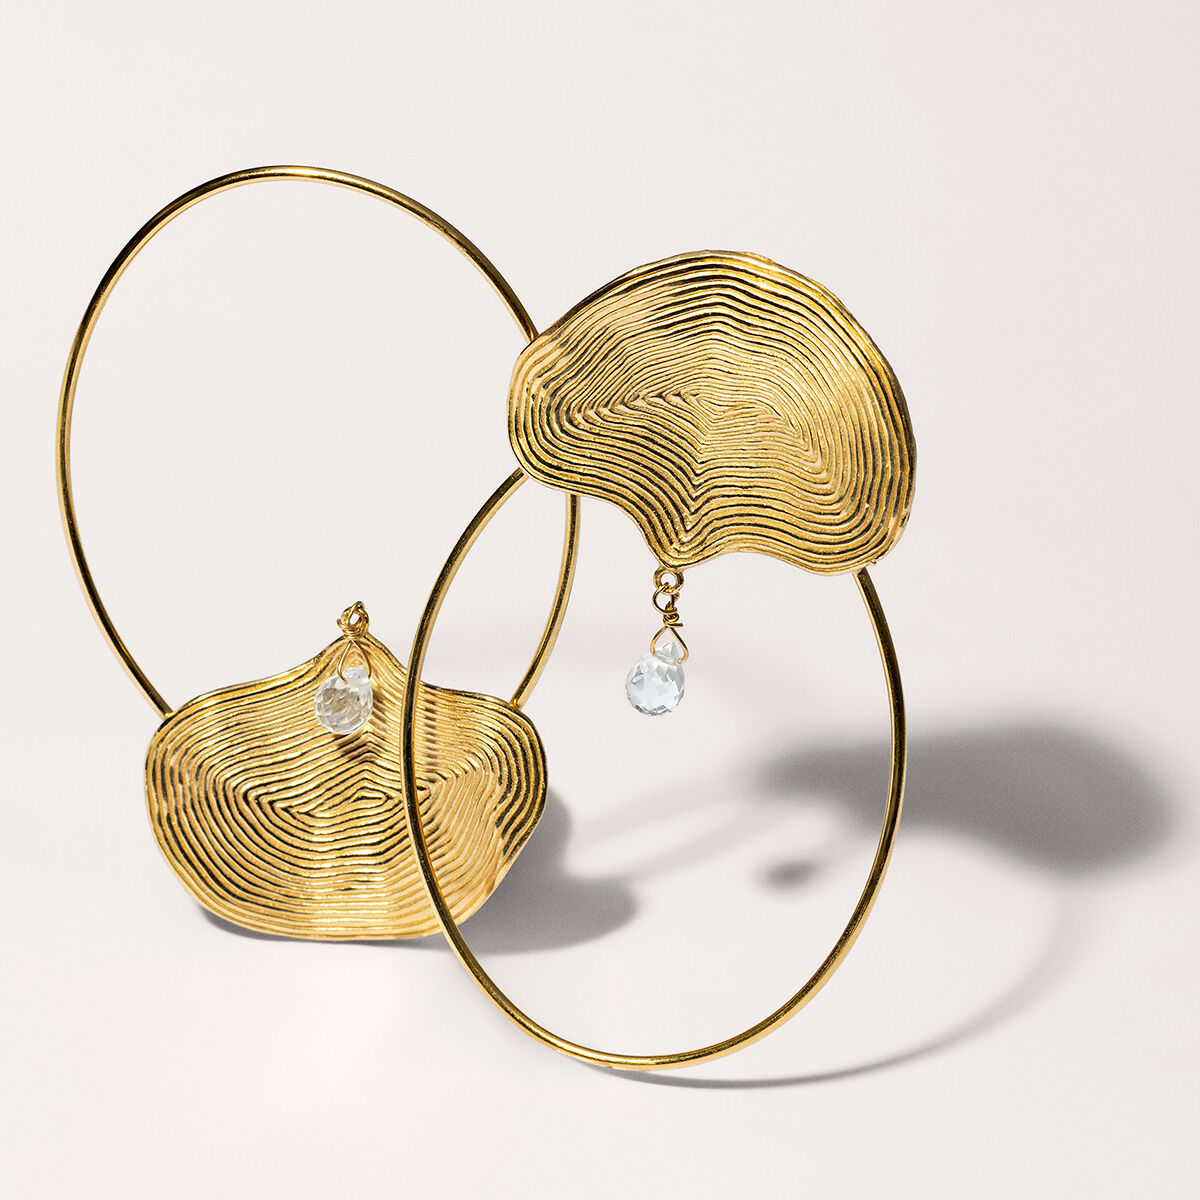 XL-size, embossed hoop earrings in 18kt yellow gold-plated silver with white topaz, J05218-02-WT, mainproduct